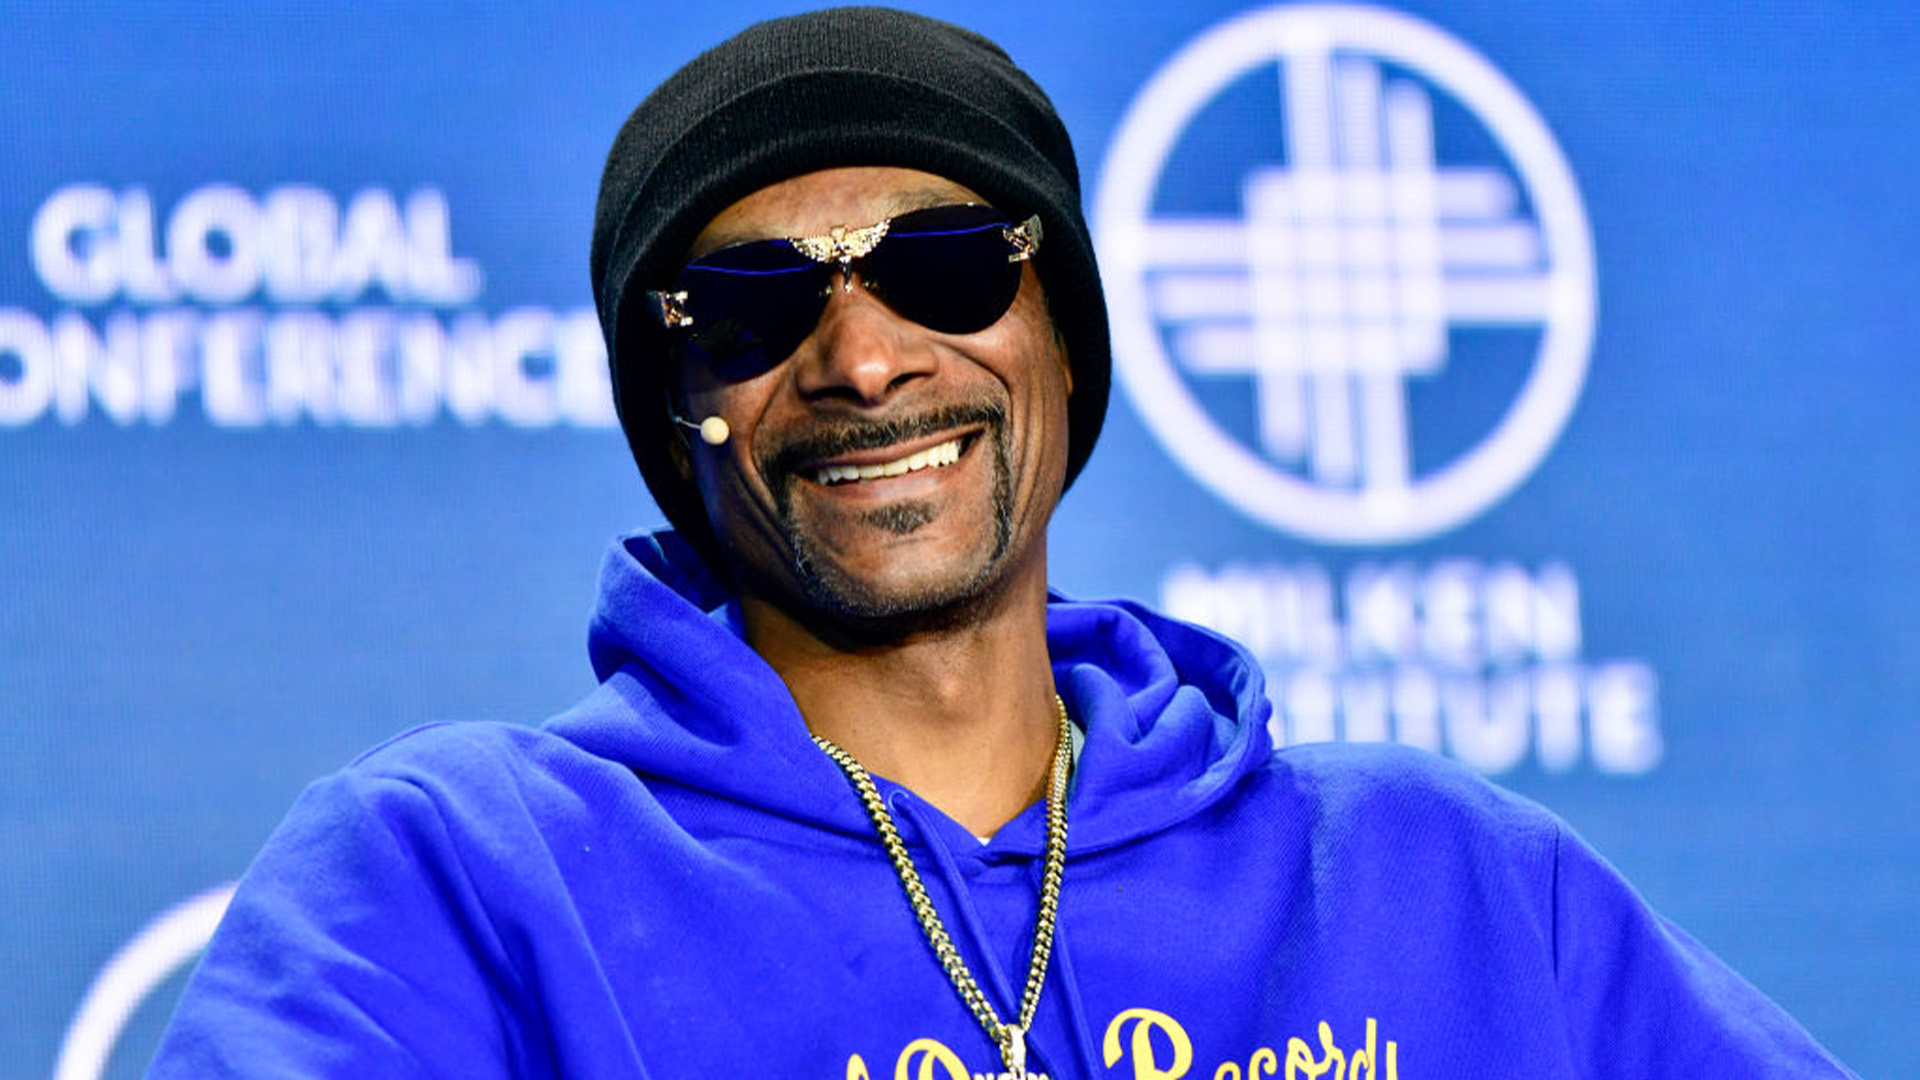 Snoop Dogg Invests In $20M Funding Round For Sound, A Web3 Music Platform